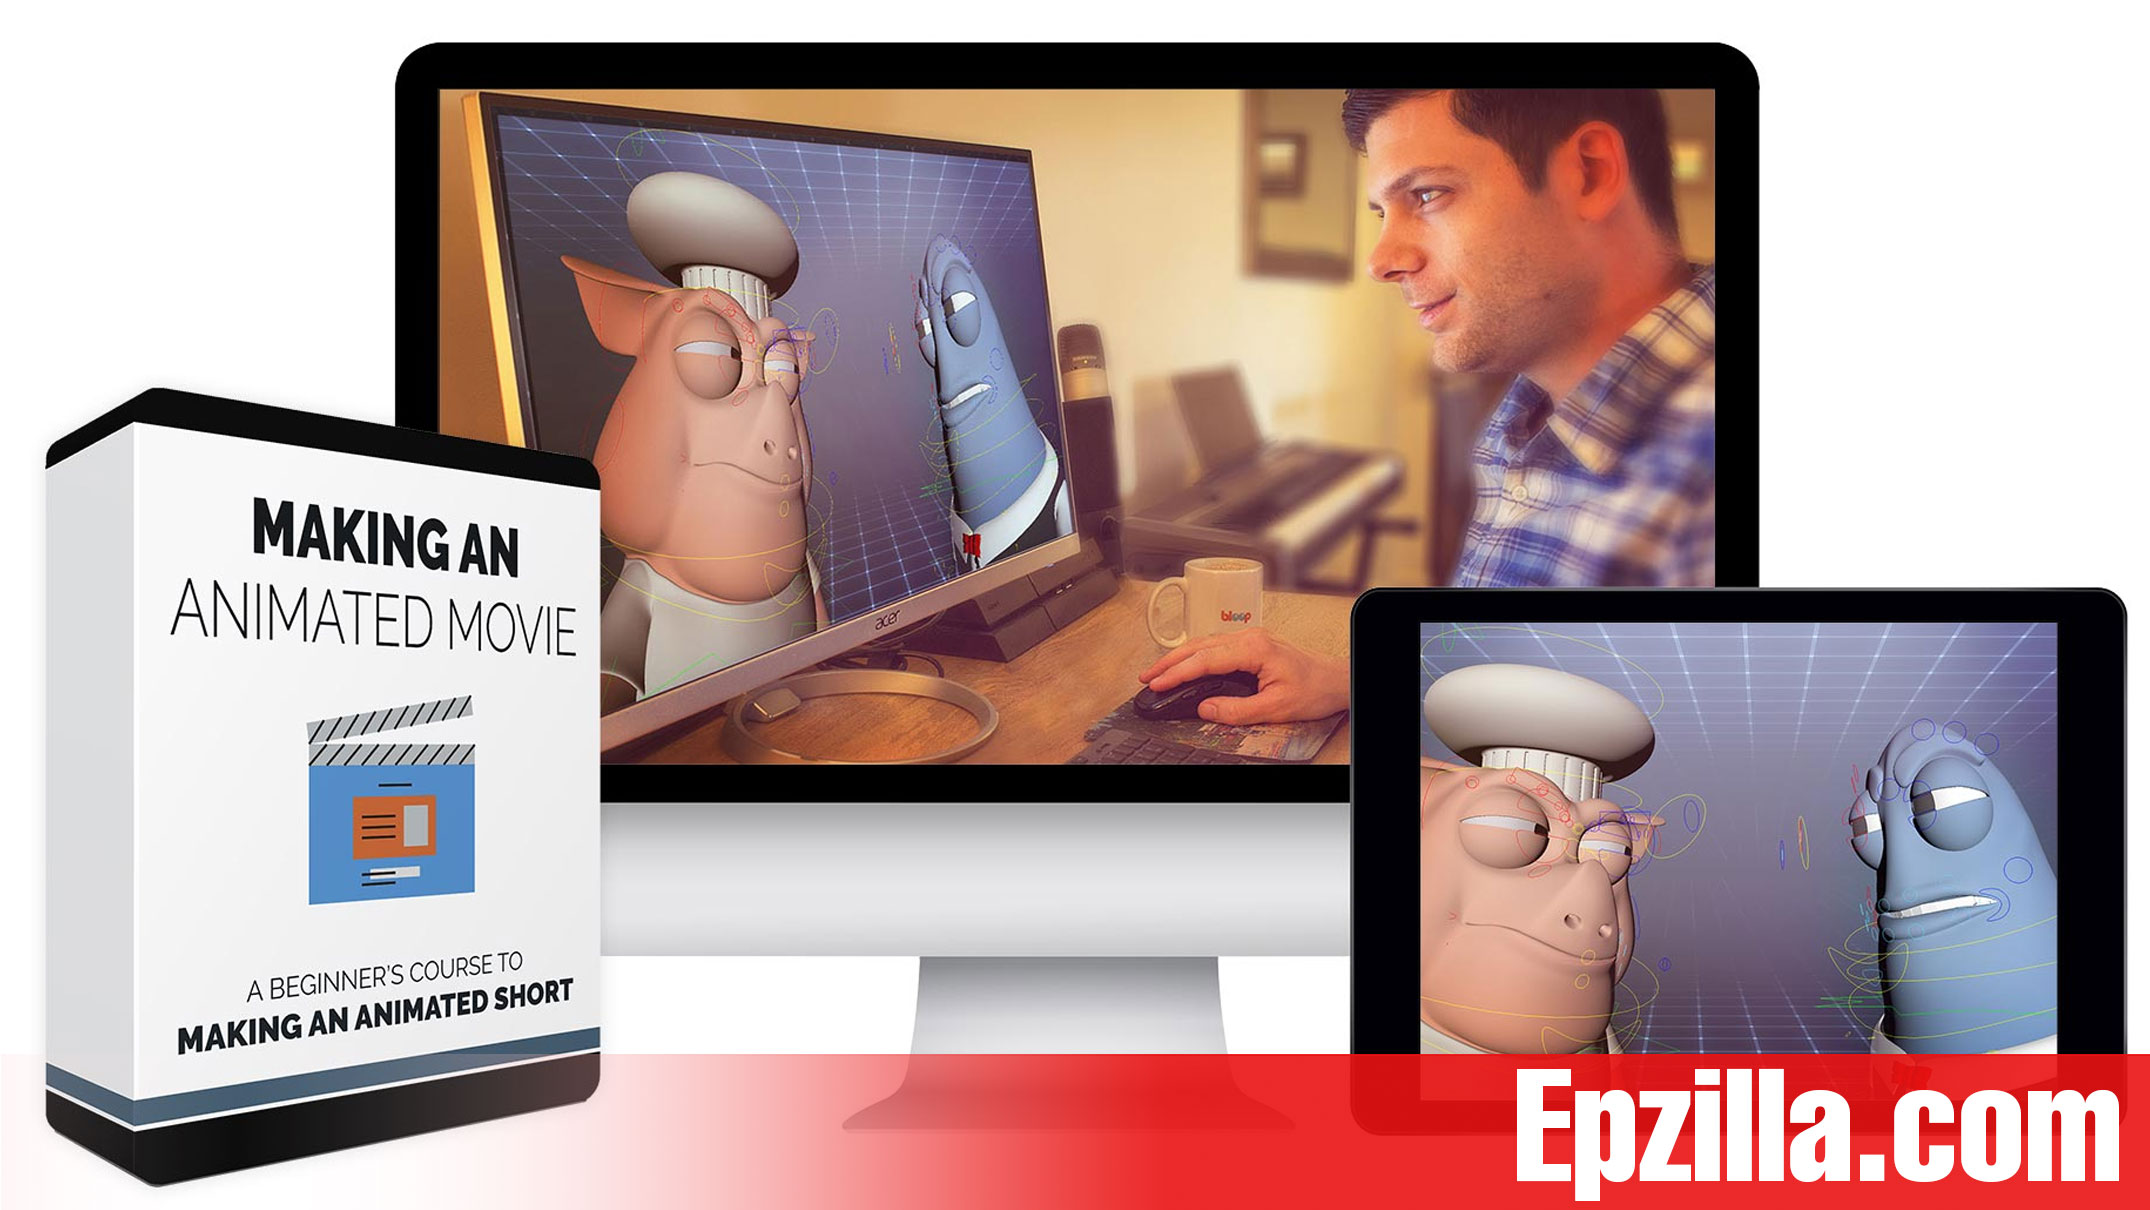 Bloop Animations Making an Animated Movie Free Download Epzilla.com Making an Animated Movie course - 30 HD Video Lessons